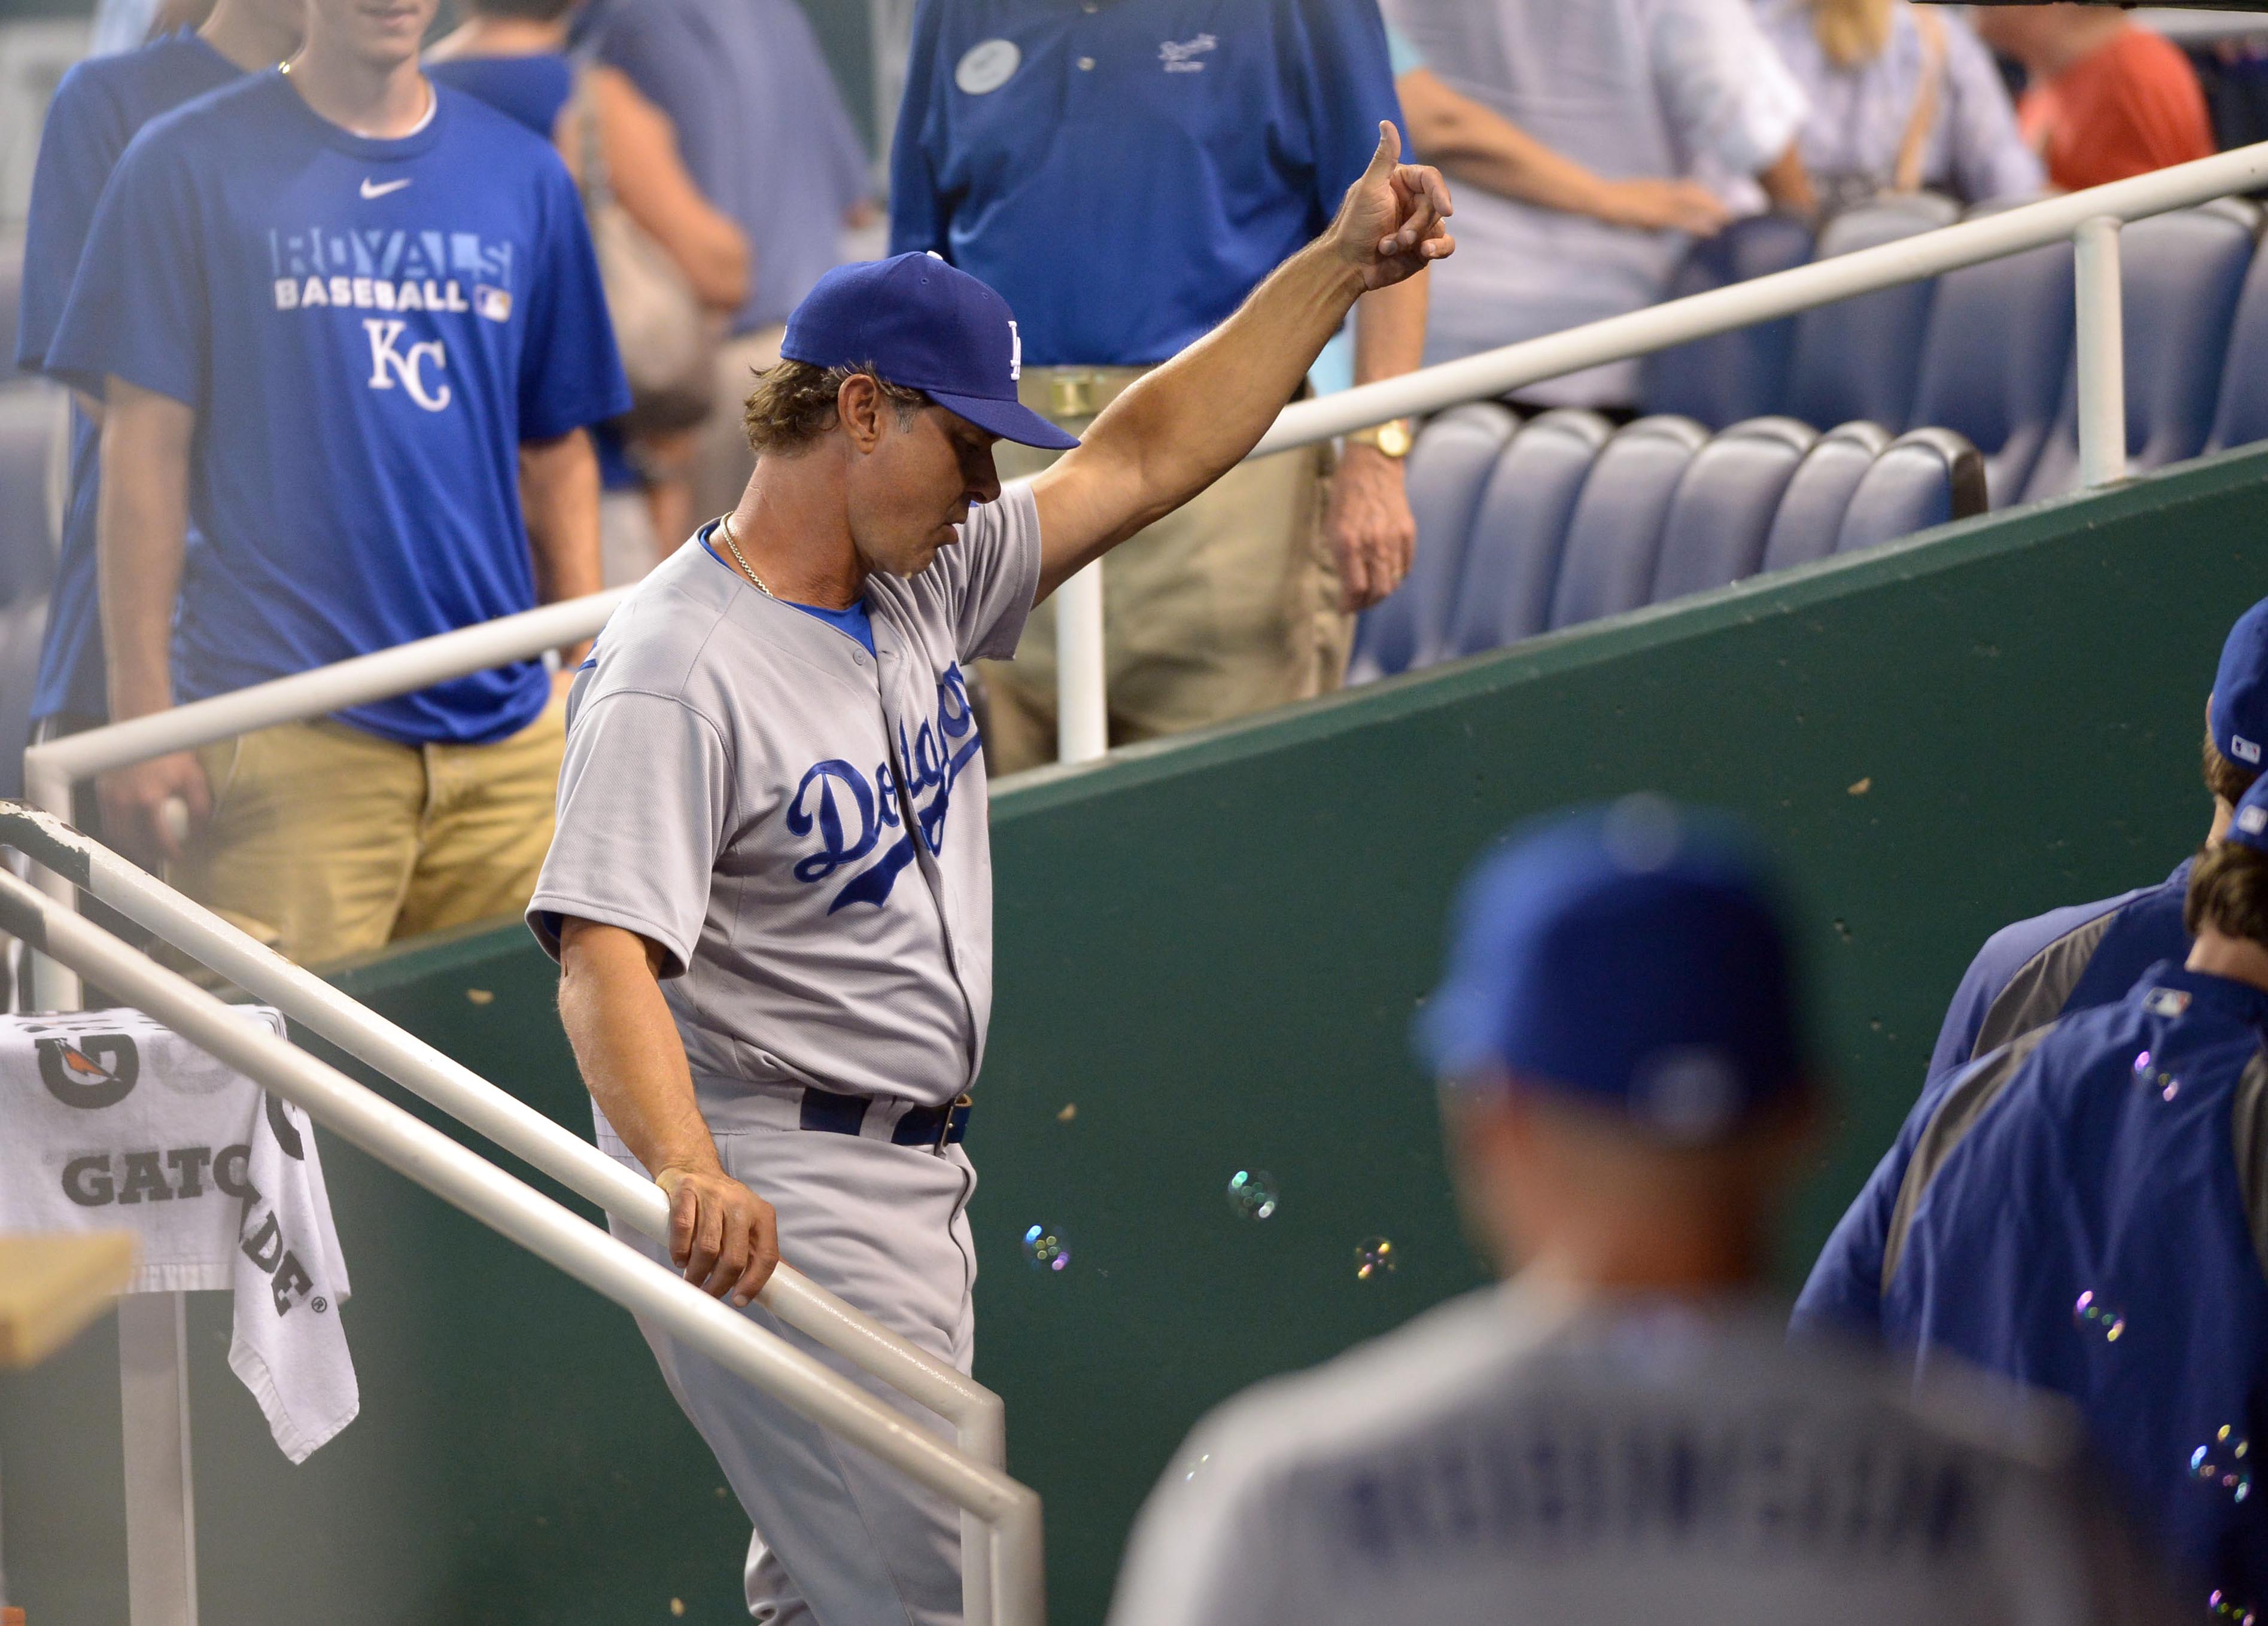 Dodgers manager Don Mattingly thinks 92½ wins is too low.